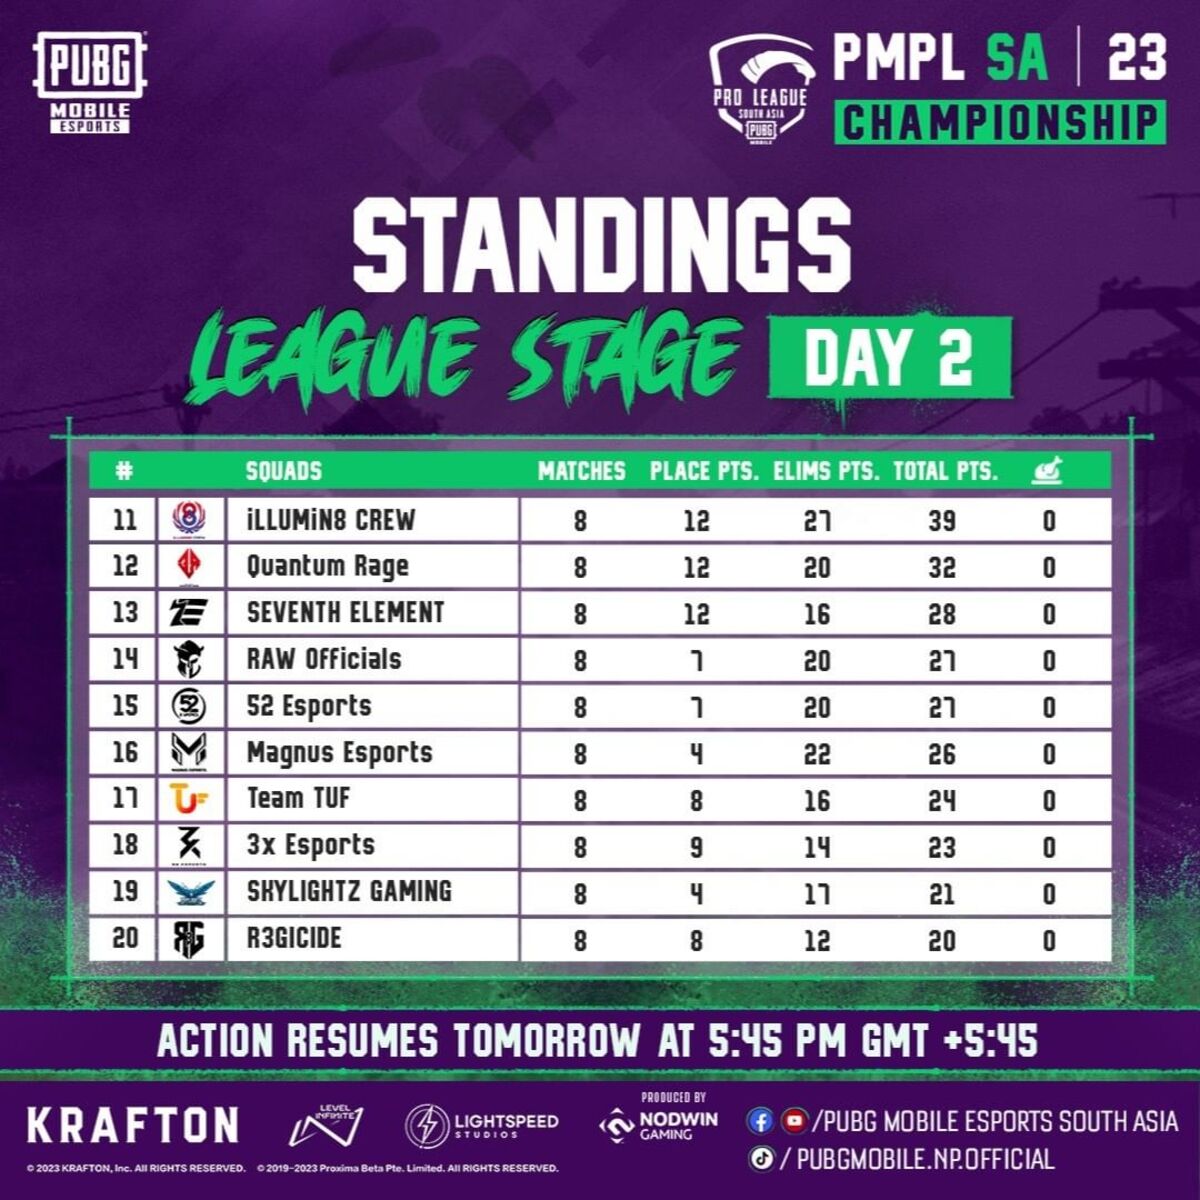 PMPL SA Championship 2023 Spring: Check who is leading the overall standings after League Stage Day 2 matches